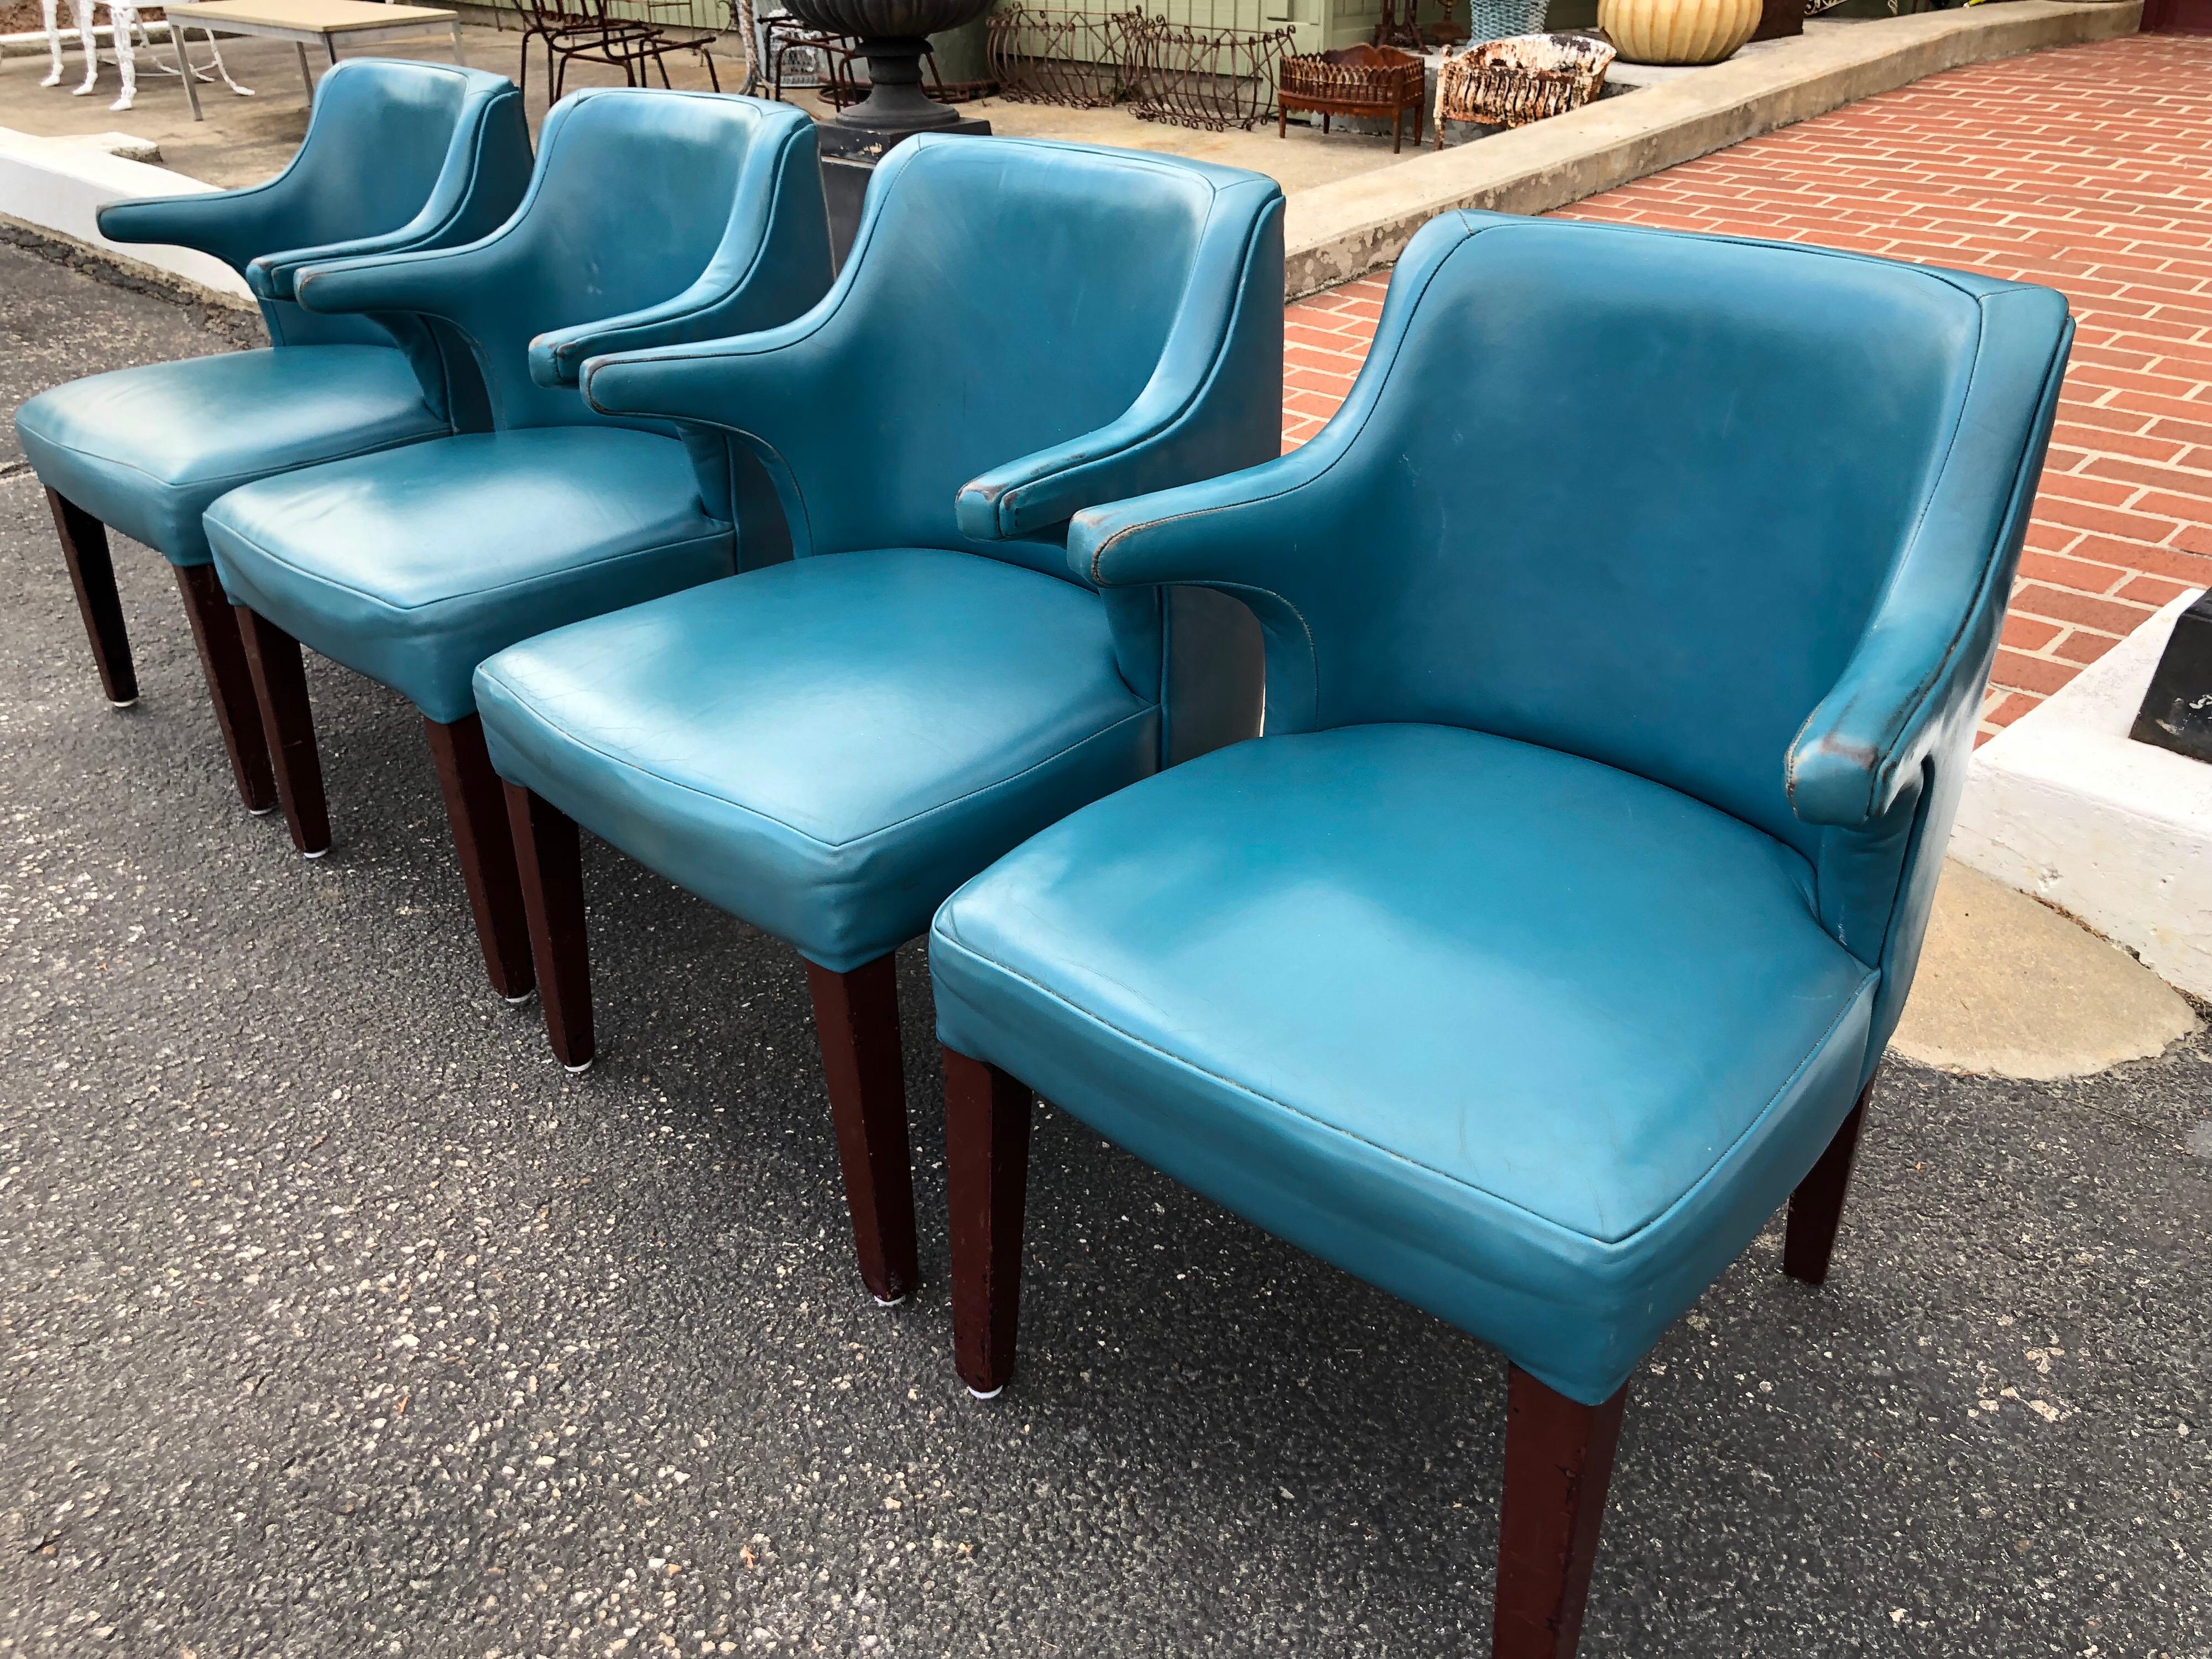 Set of Four Mid-Century Modern Chairs in Peacock Blue 4